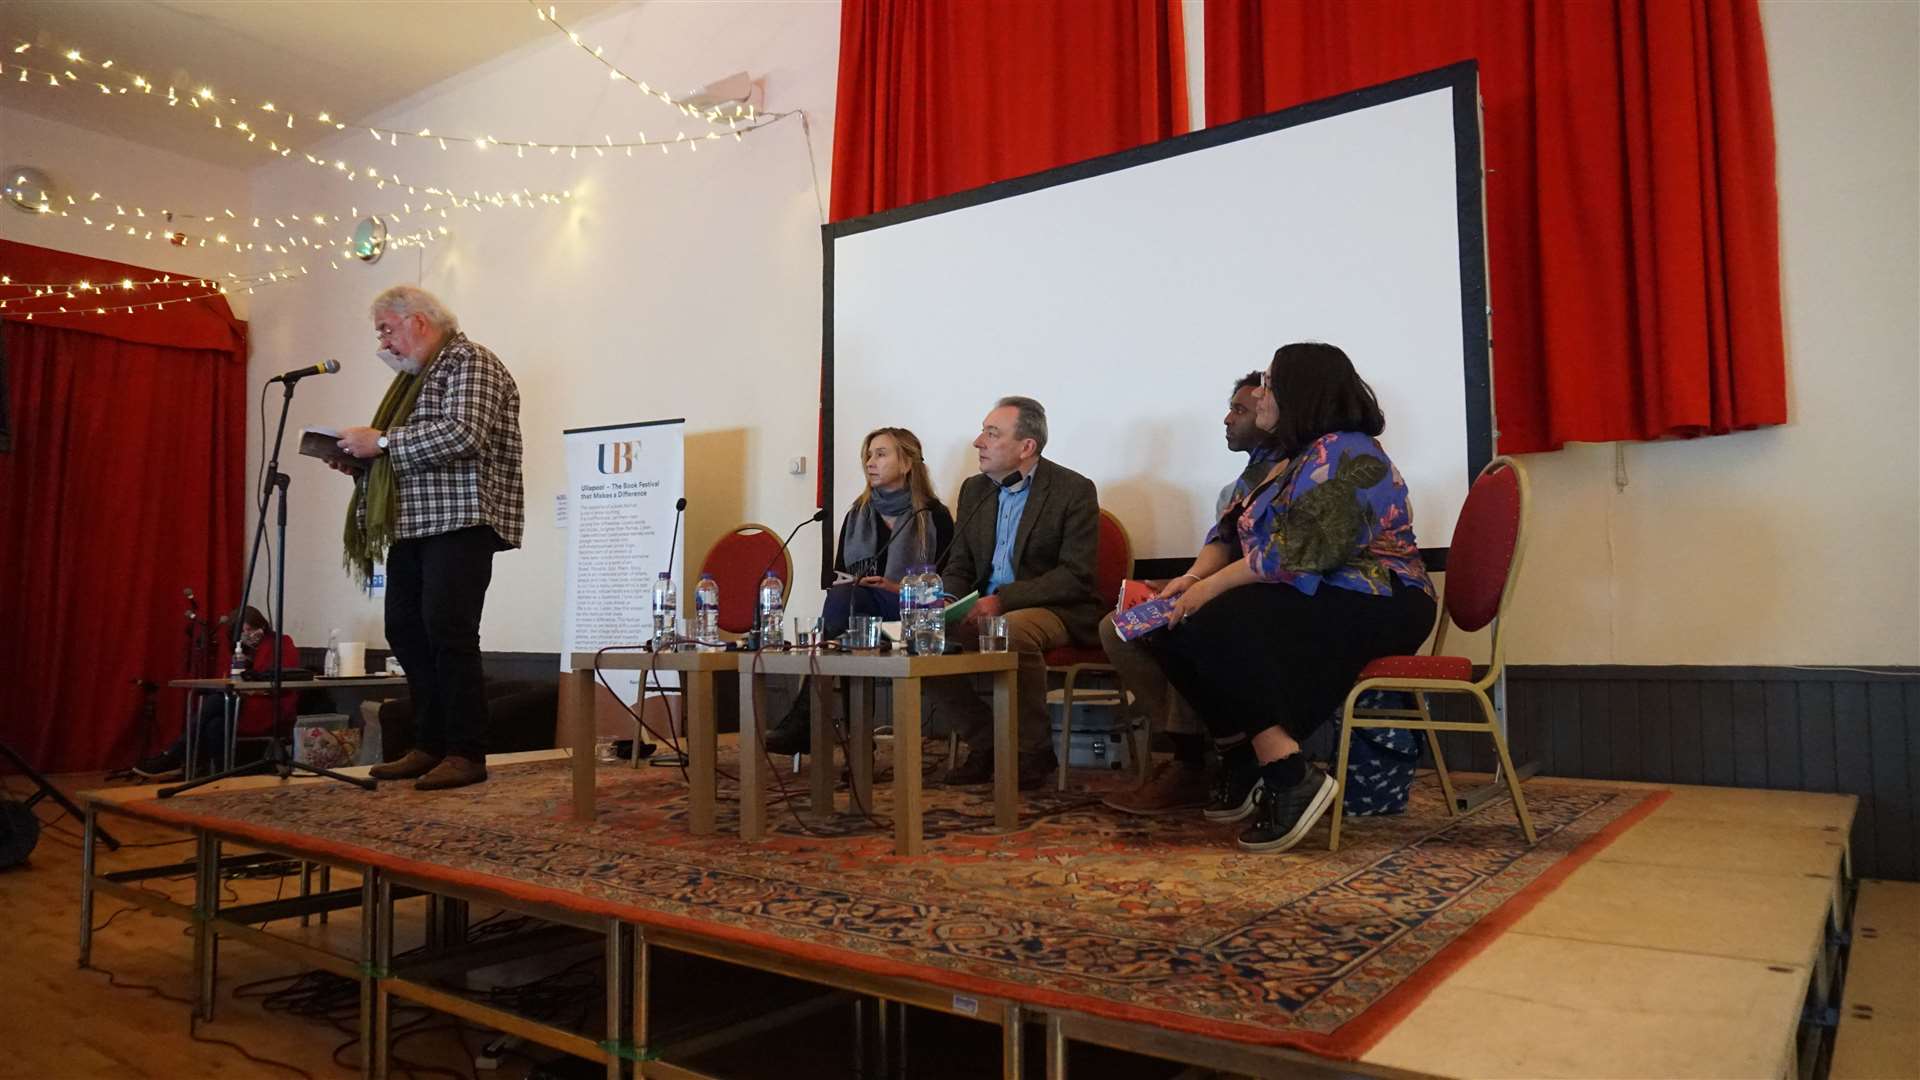 George Gunn reads one of his poems during the poetry talk with Triin Soomset, Ian Williams and Hannah Lavery, chaired by y Jim Carruth.